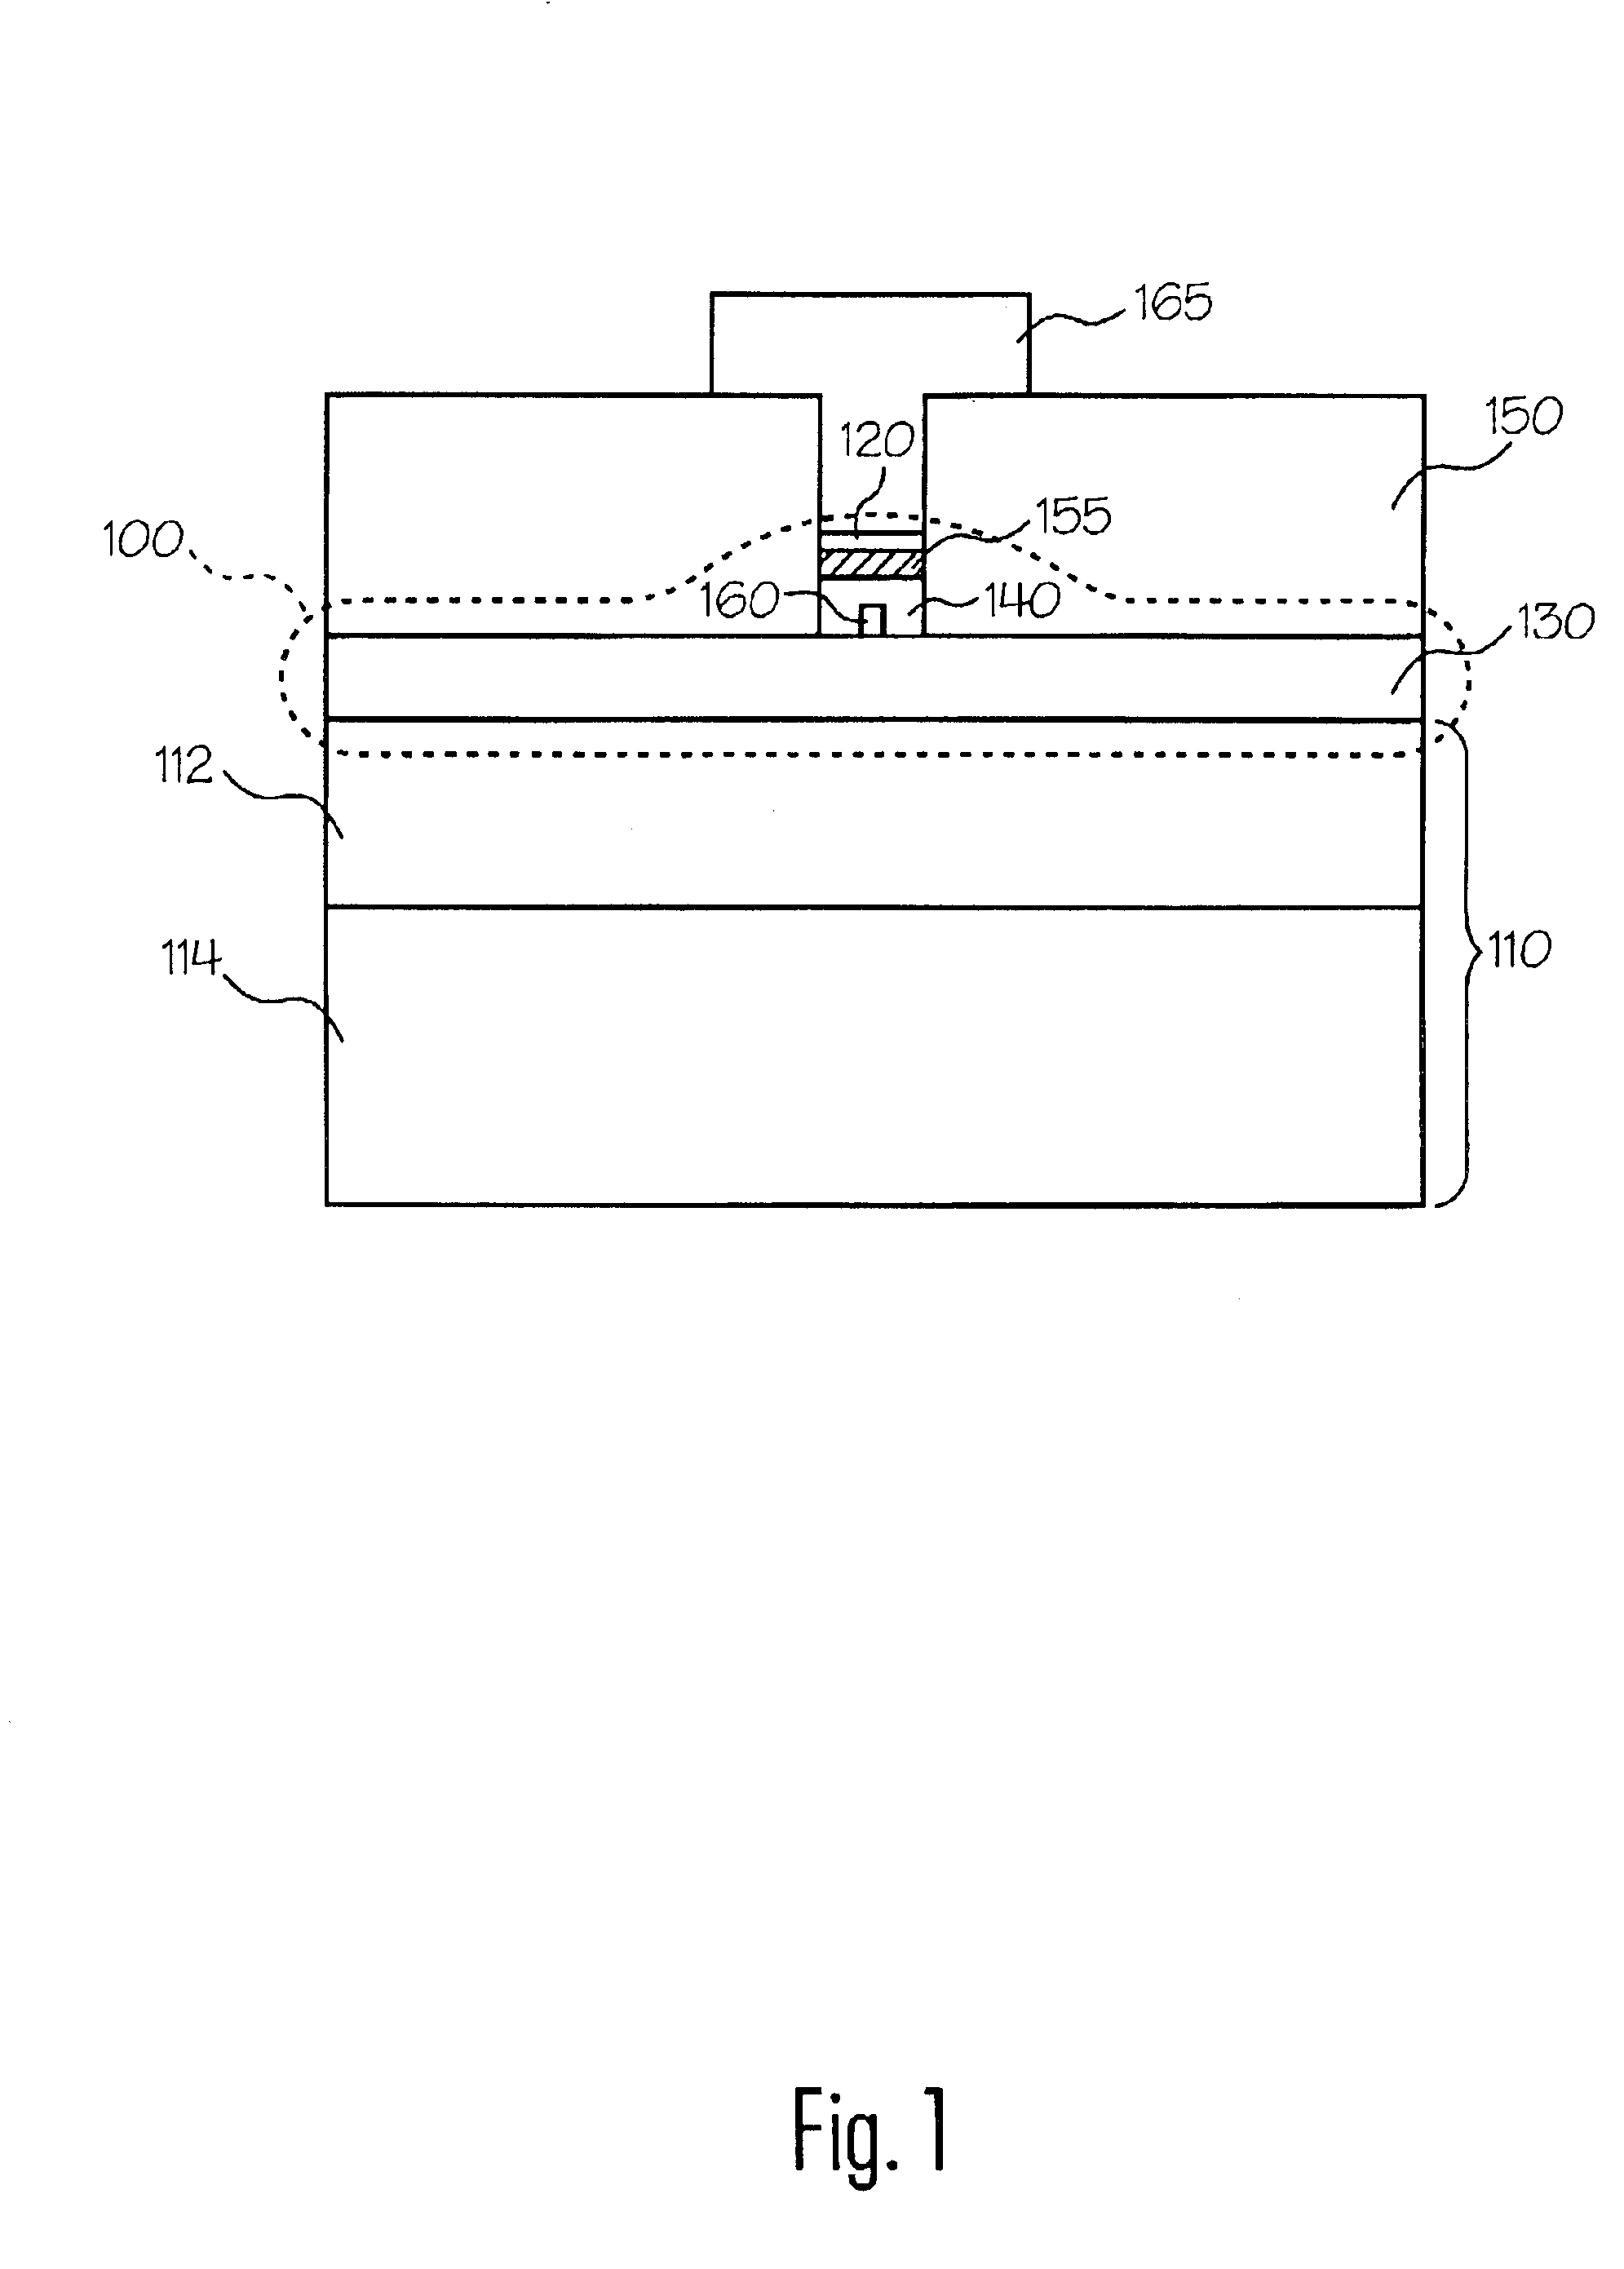 Programming circuit for a programmable microelectronic device, system including the circuit, and method of forming the same